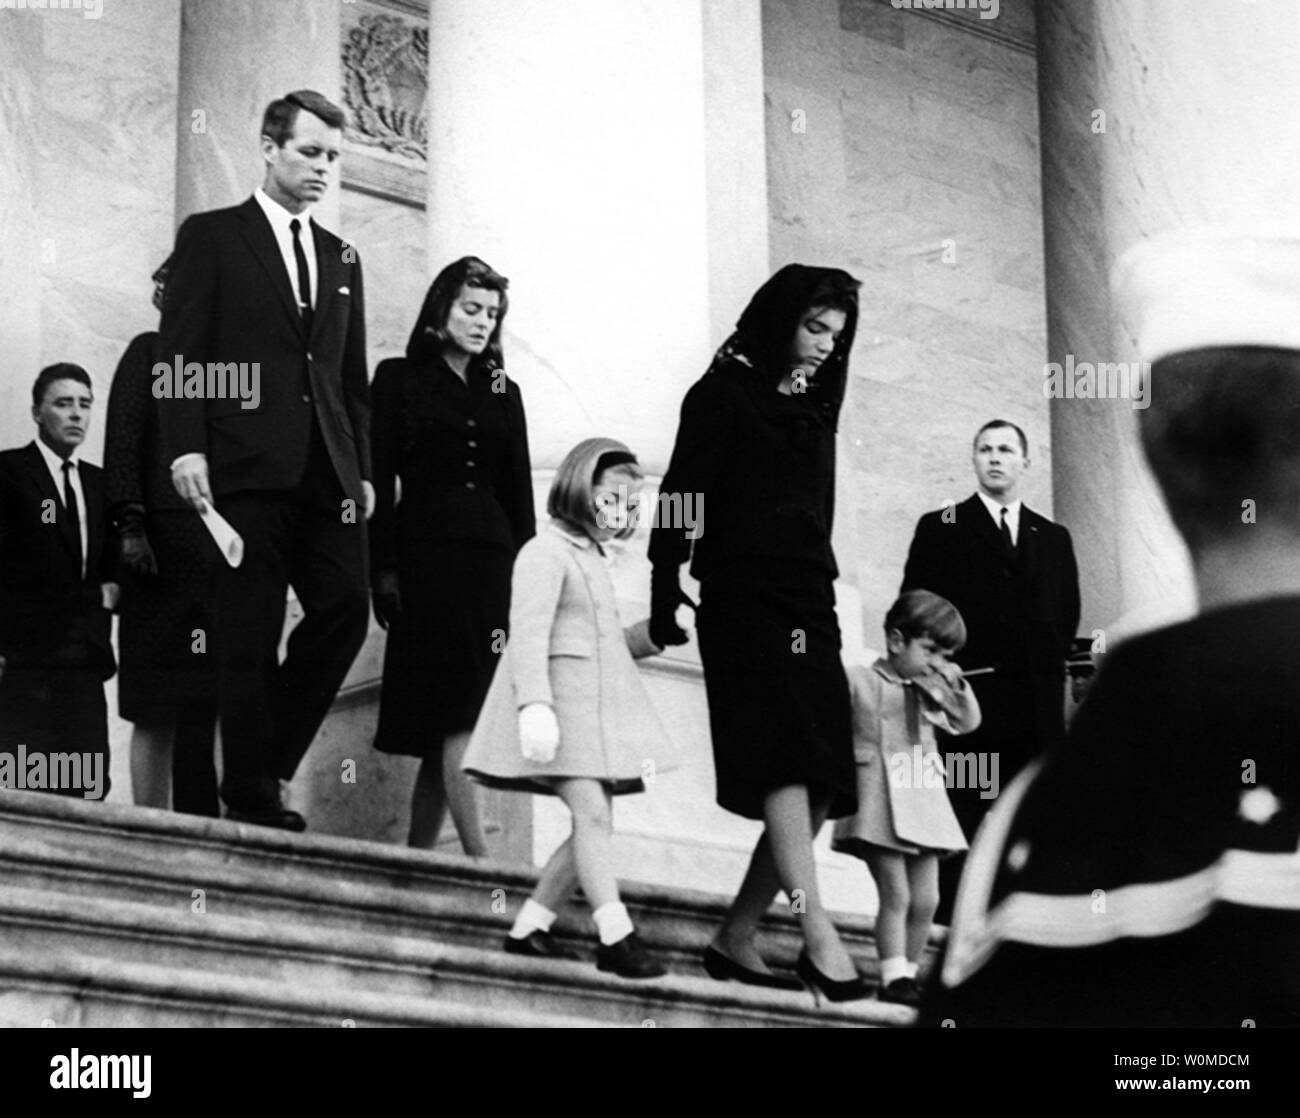 The Kennedy family departs the Capitol on November 25, 1963. (L to R) Peter Lawford, Attorney General Robert Kennedy, Patricia Kennedy Lawford, Caroline Kennedy, First Lady Jacqueline Kennedy, and John F. Kennedy Jr. November 22, 2008 marks the 45th anniversary of the day President Kennedy was assassinated in Dallas, Texas. (UPI Photo/Abbie Rowe/John F. Kennedy Presidential Library & Museum) Stock Photo